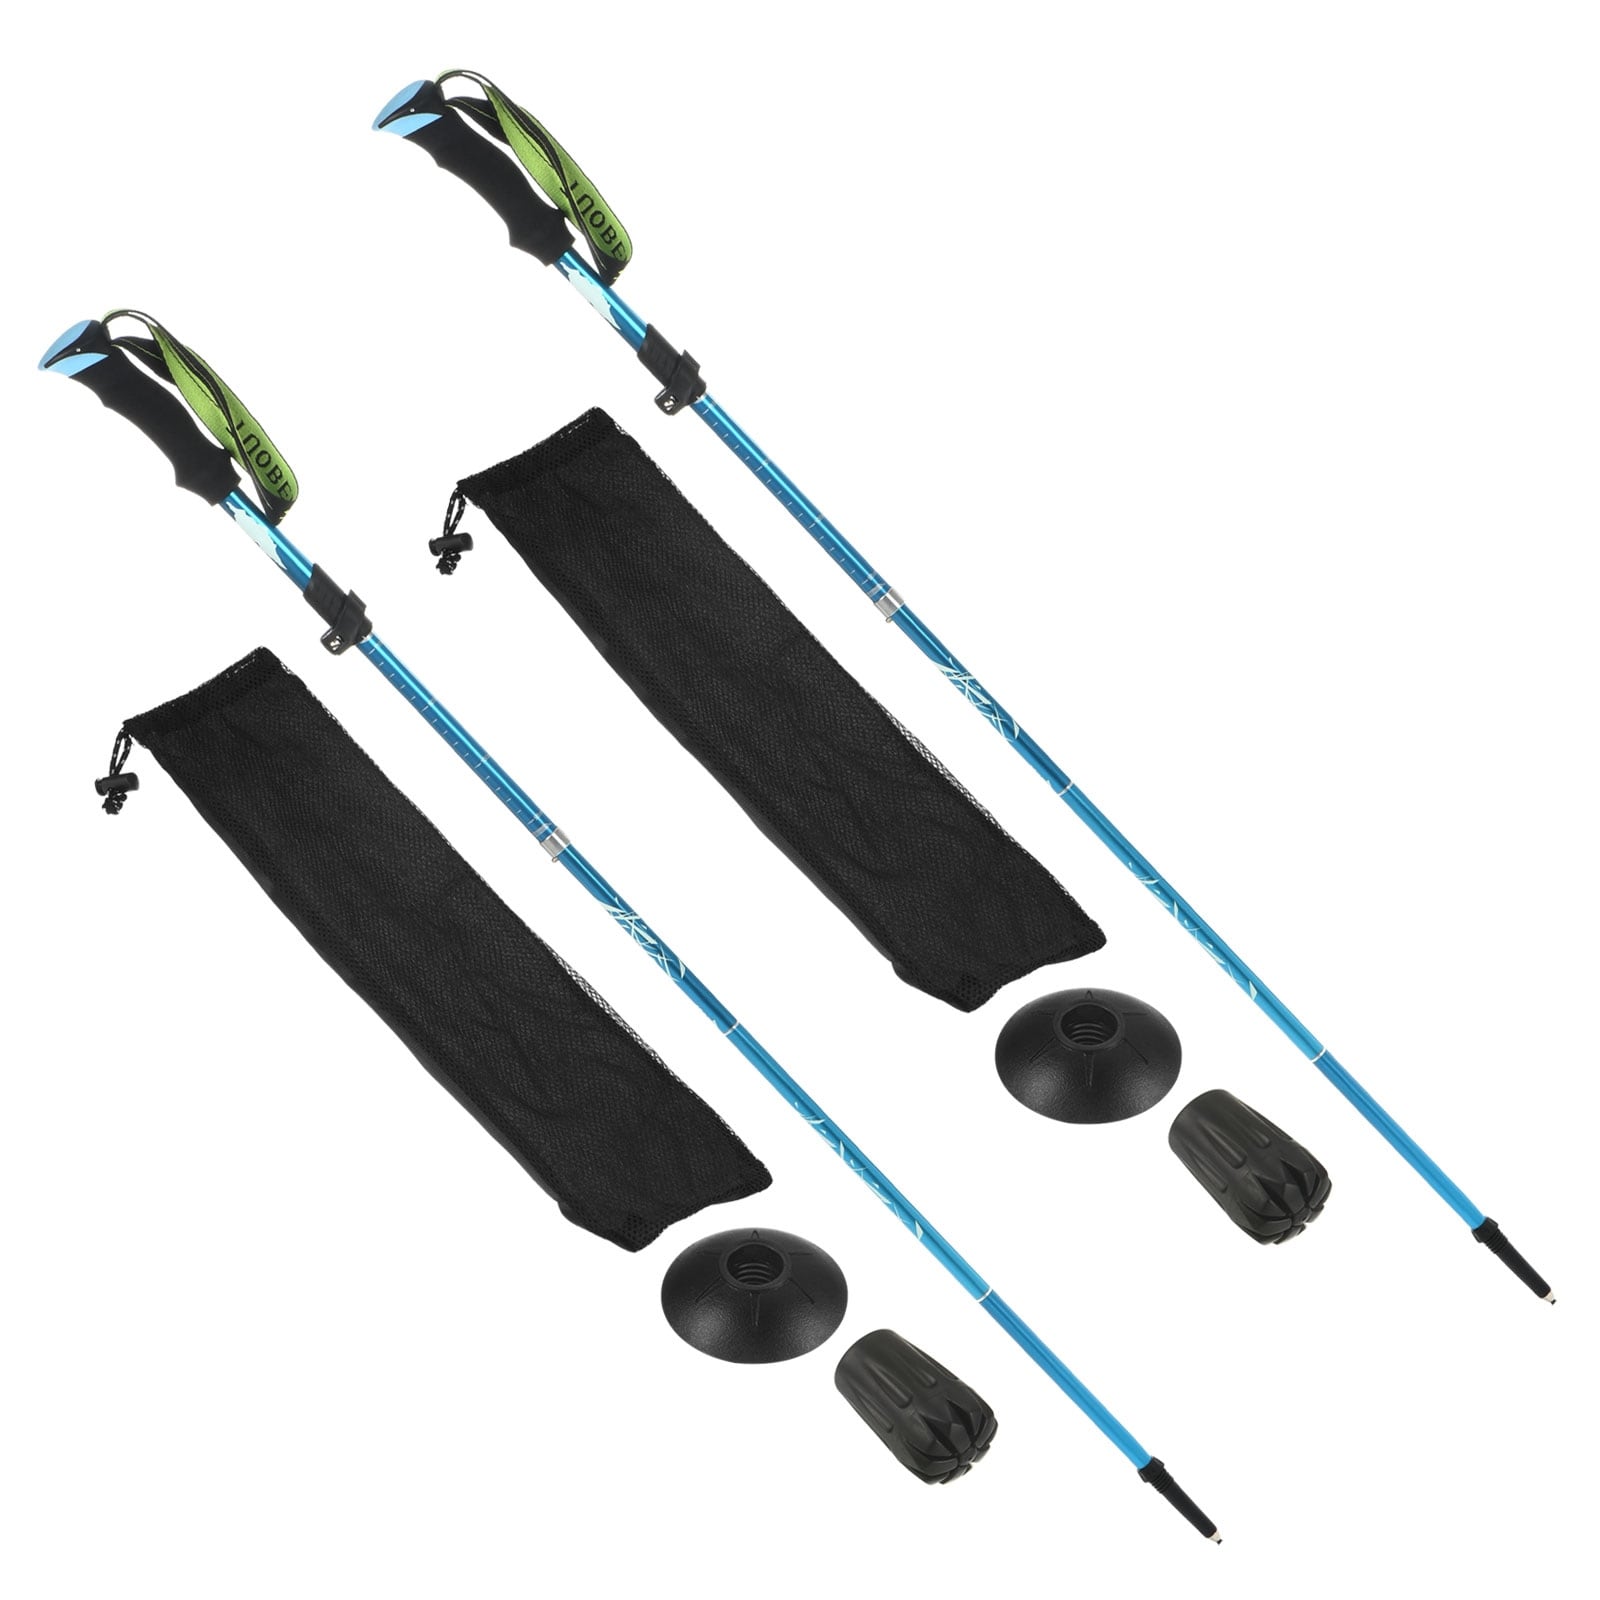 https://ak1.ostkcdn.com/images/products/is/images/direct/fc7d5e3dd0d47c182a875038f3da4599a8cefa60/2Pcs-Trekking-Poles-Collapsible-Hiking-Pole-37-43-Inch-with-Mud-Basket-Blue.jpg